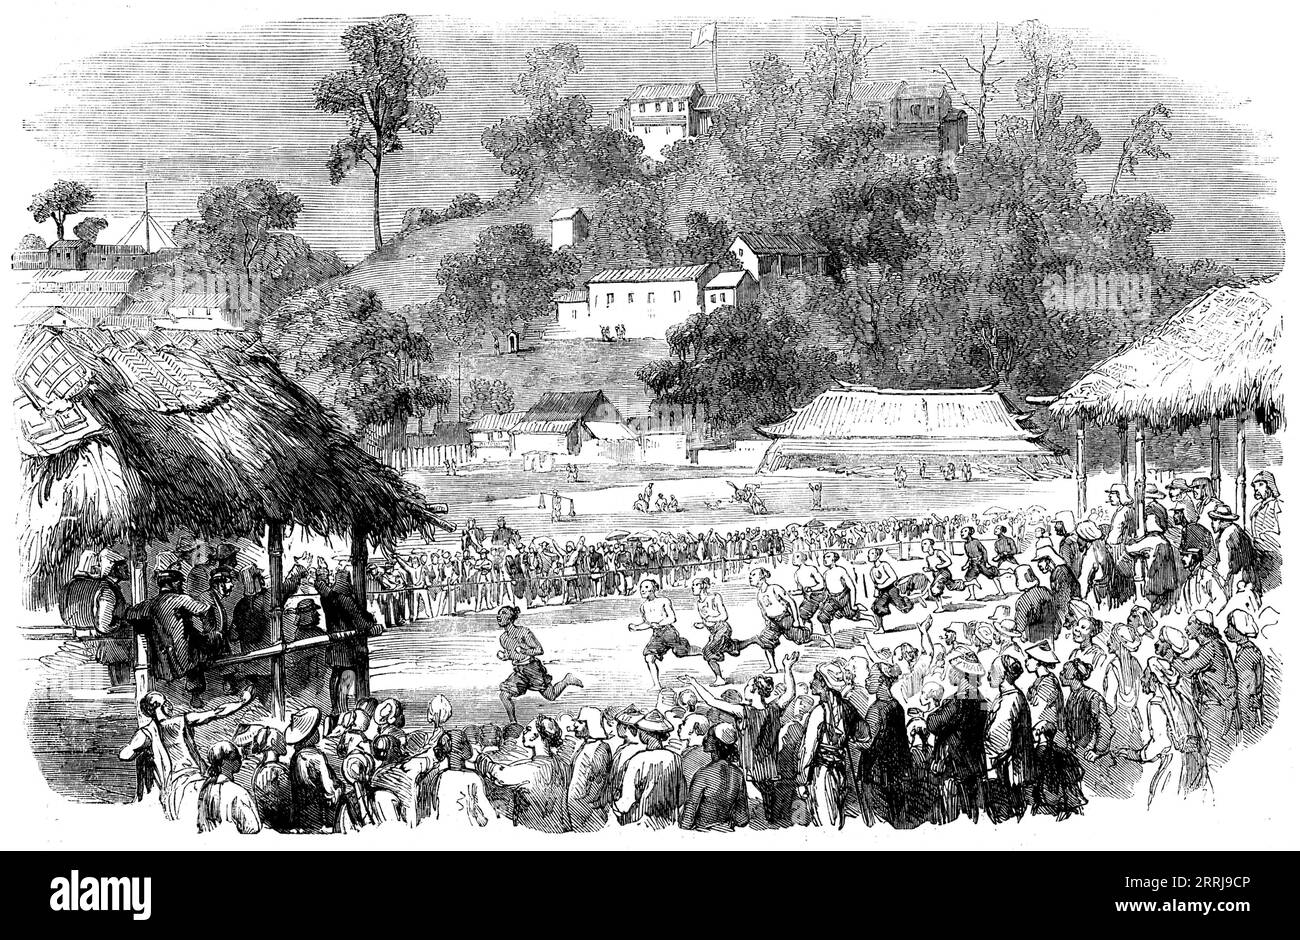 Foot-race at Canton by Coolies of the Military Train - sketched by our special artist and correspondent, 1858. 'On the Queen's birthday the English at Canton had a review in the morning, and wrestling matches, foot-races, &amp;c. Among others, the coolies of the Bamboo Regiment (Military Train) had a run. This is the moment selected for the Sketch...The hill at the back is &quot;head-quarters&quot;; the English flag has long ceased to fly there, but the French waves over Canton. Among the sports of the day was a pyramid formed by the coolies getting on each other's shoulders till they reached Stock Photo